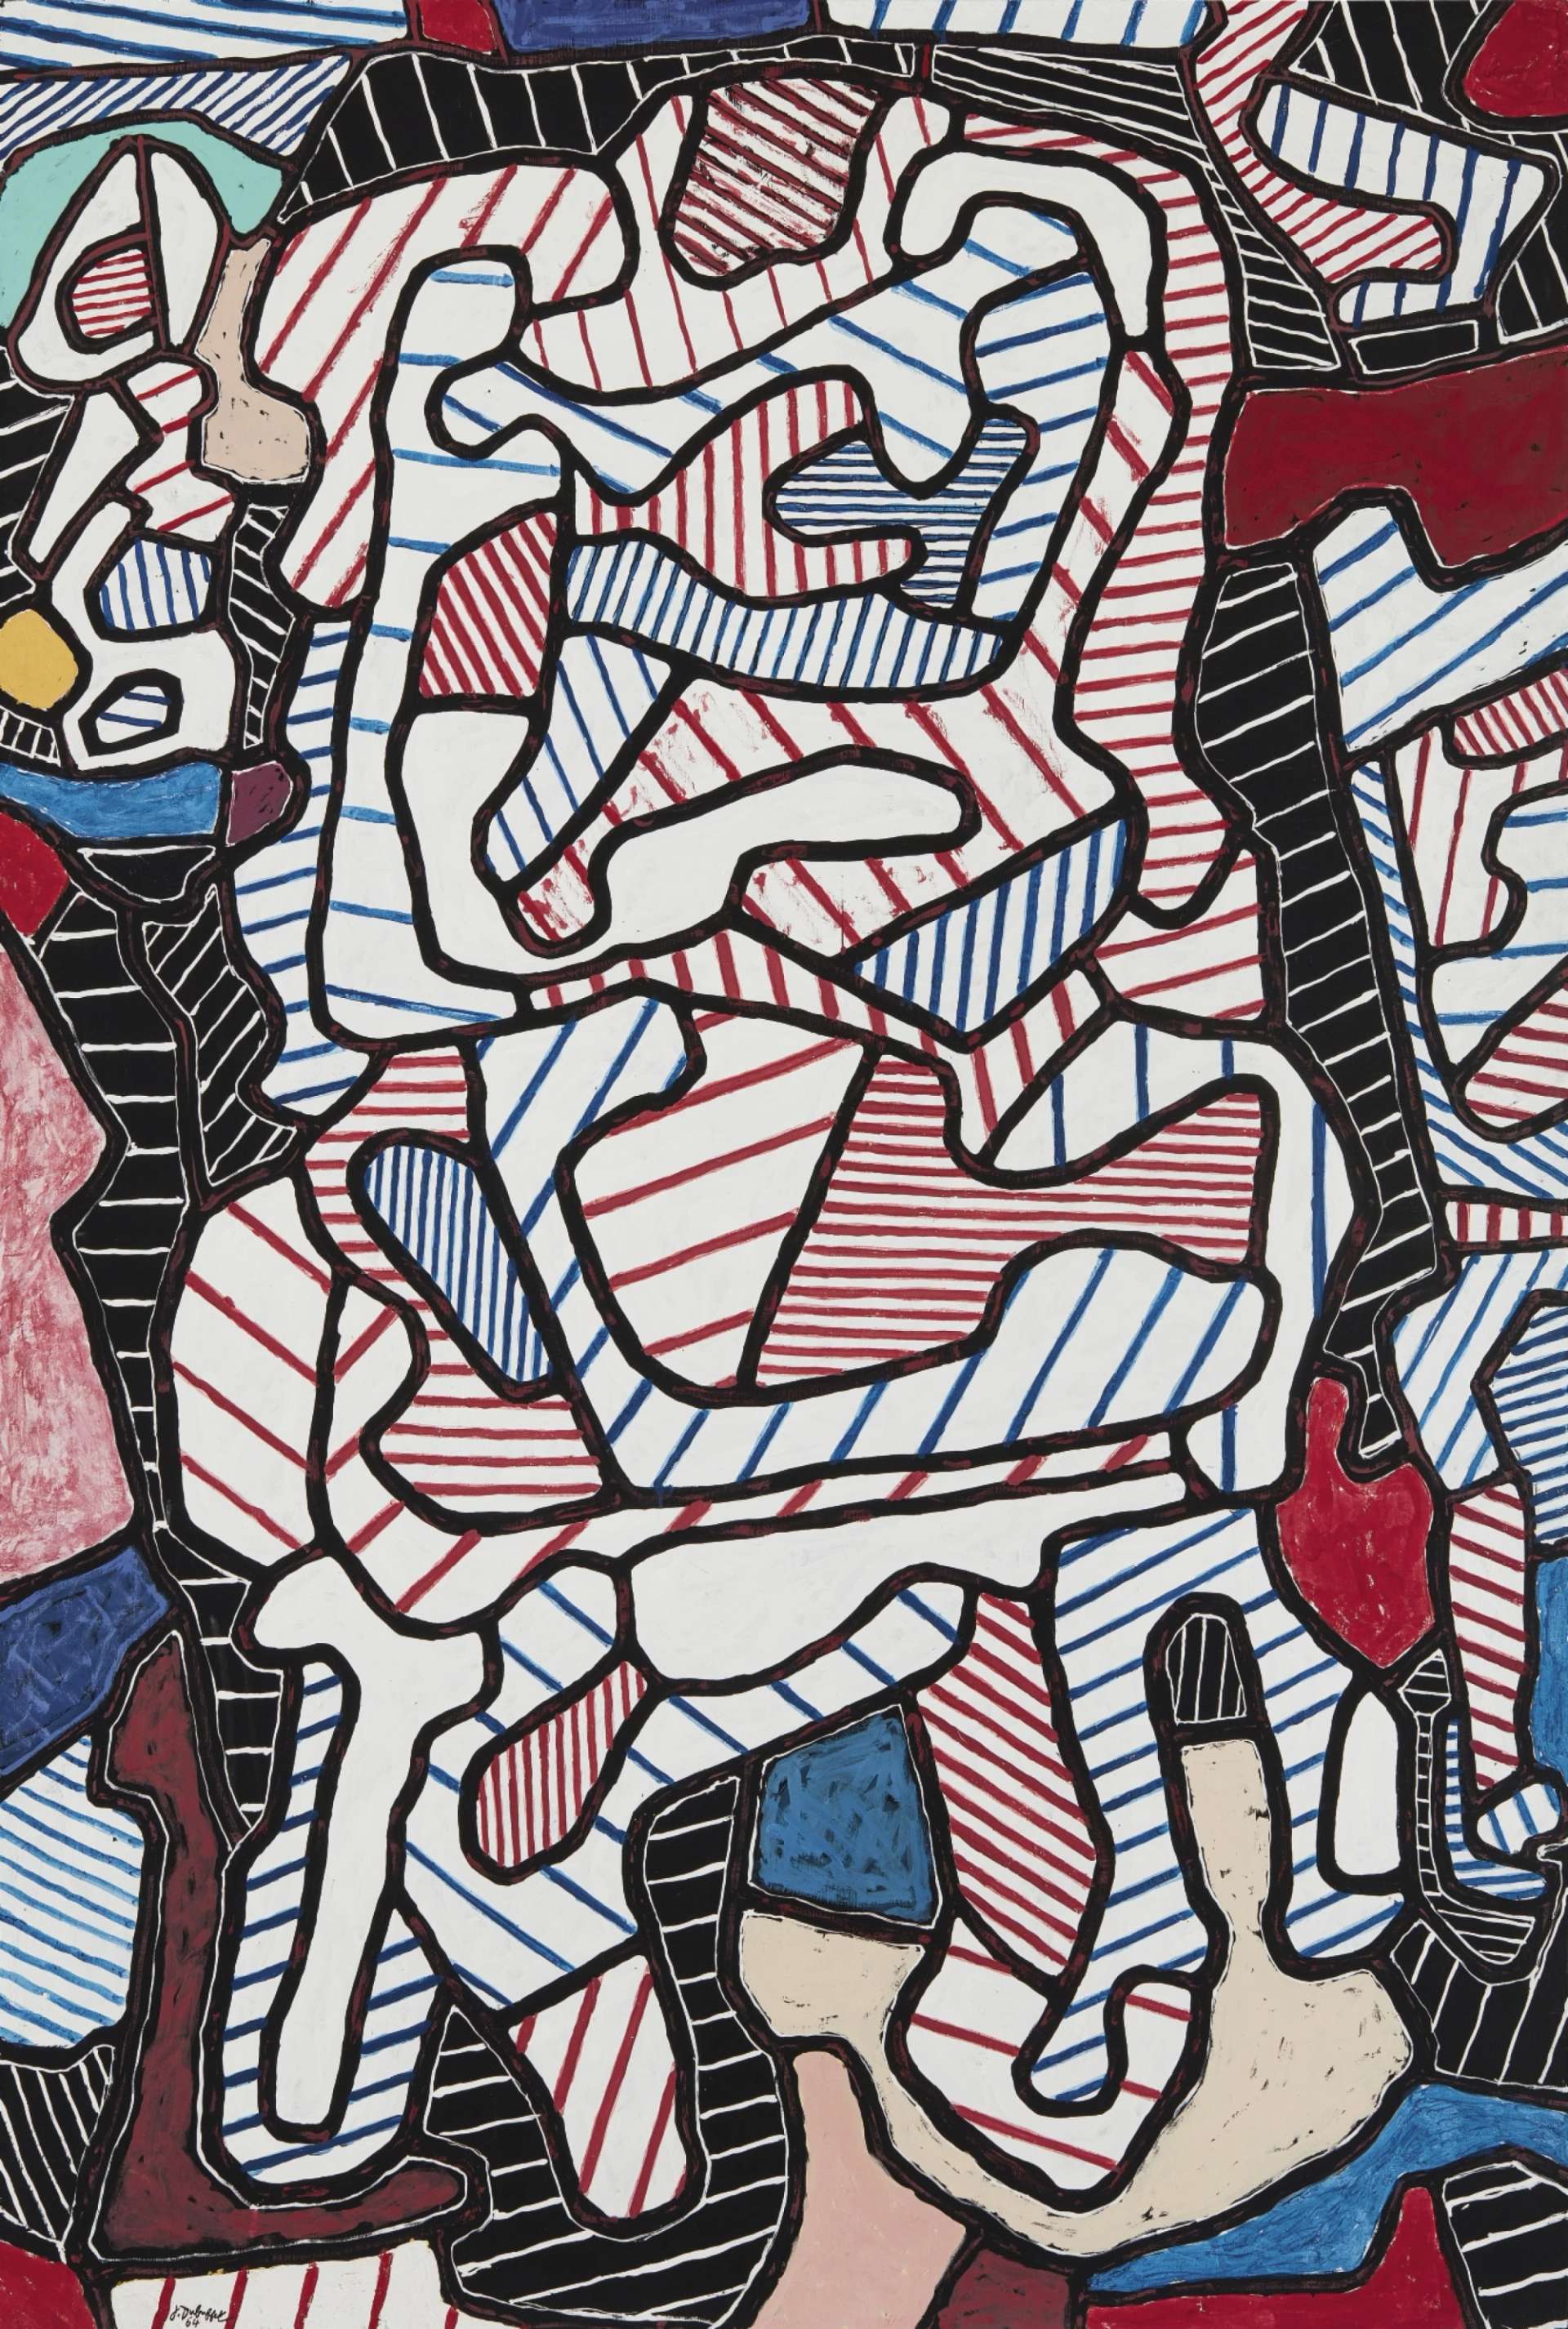 La Chaise by Jean Dubuffet © Sotheby's